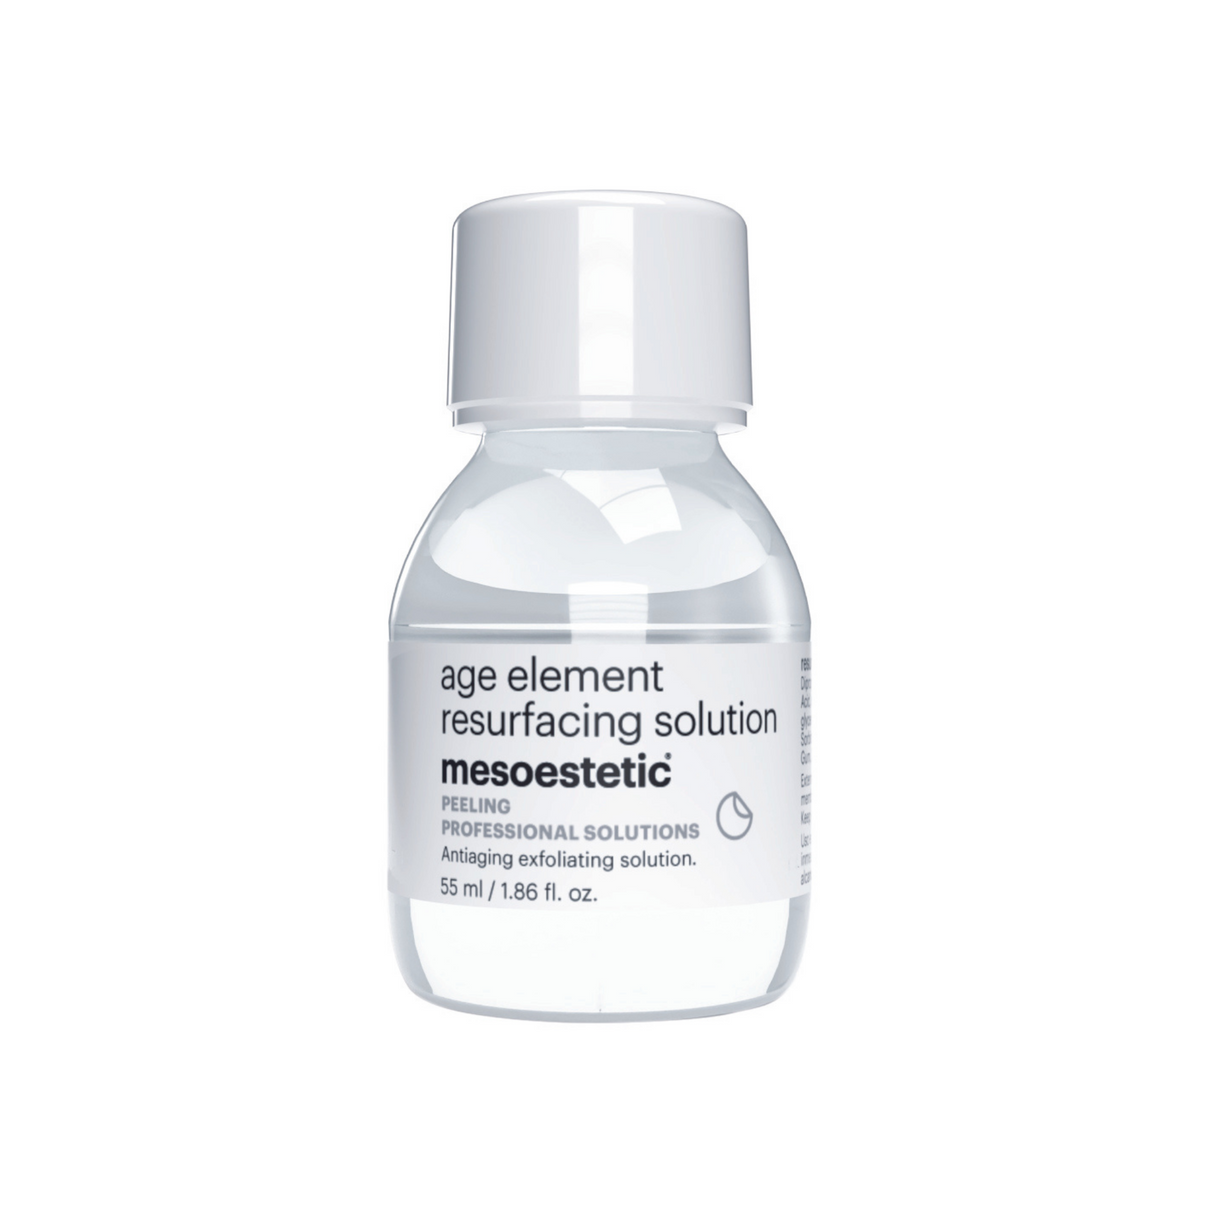 age element resurfacing solutions | Exophilizing solution before procedures | 3x55ml